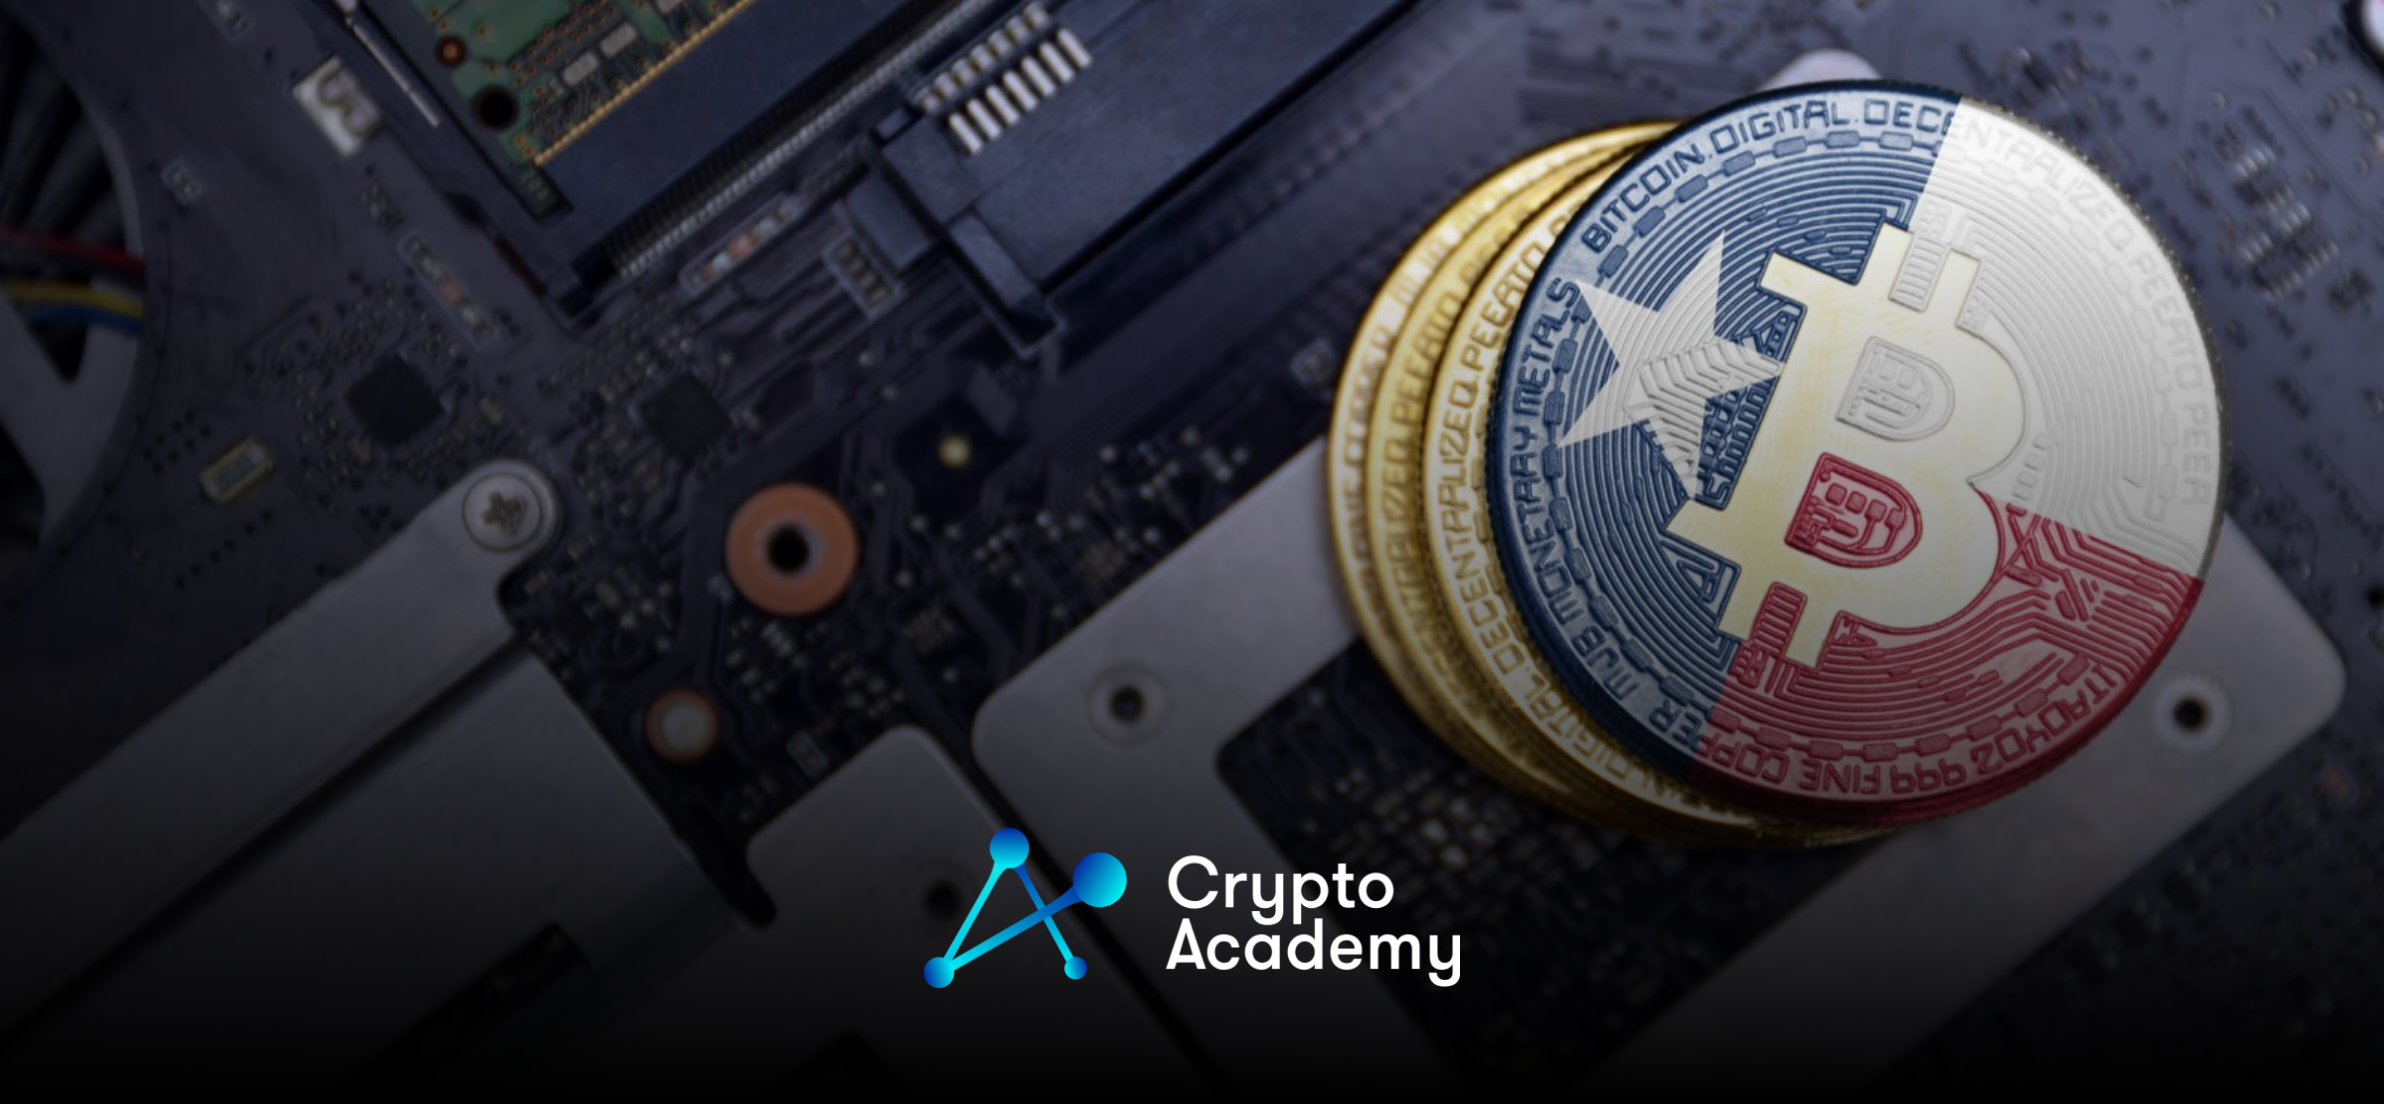 Texas Takes the Lead in US Bitcoin Mining